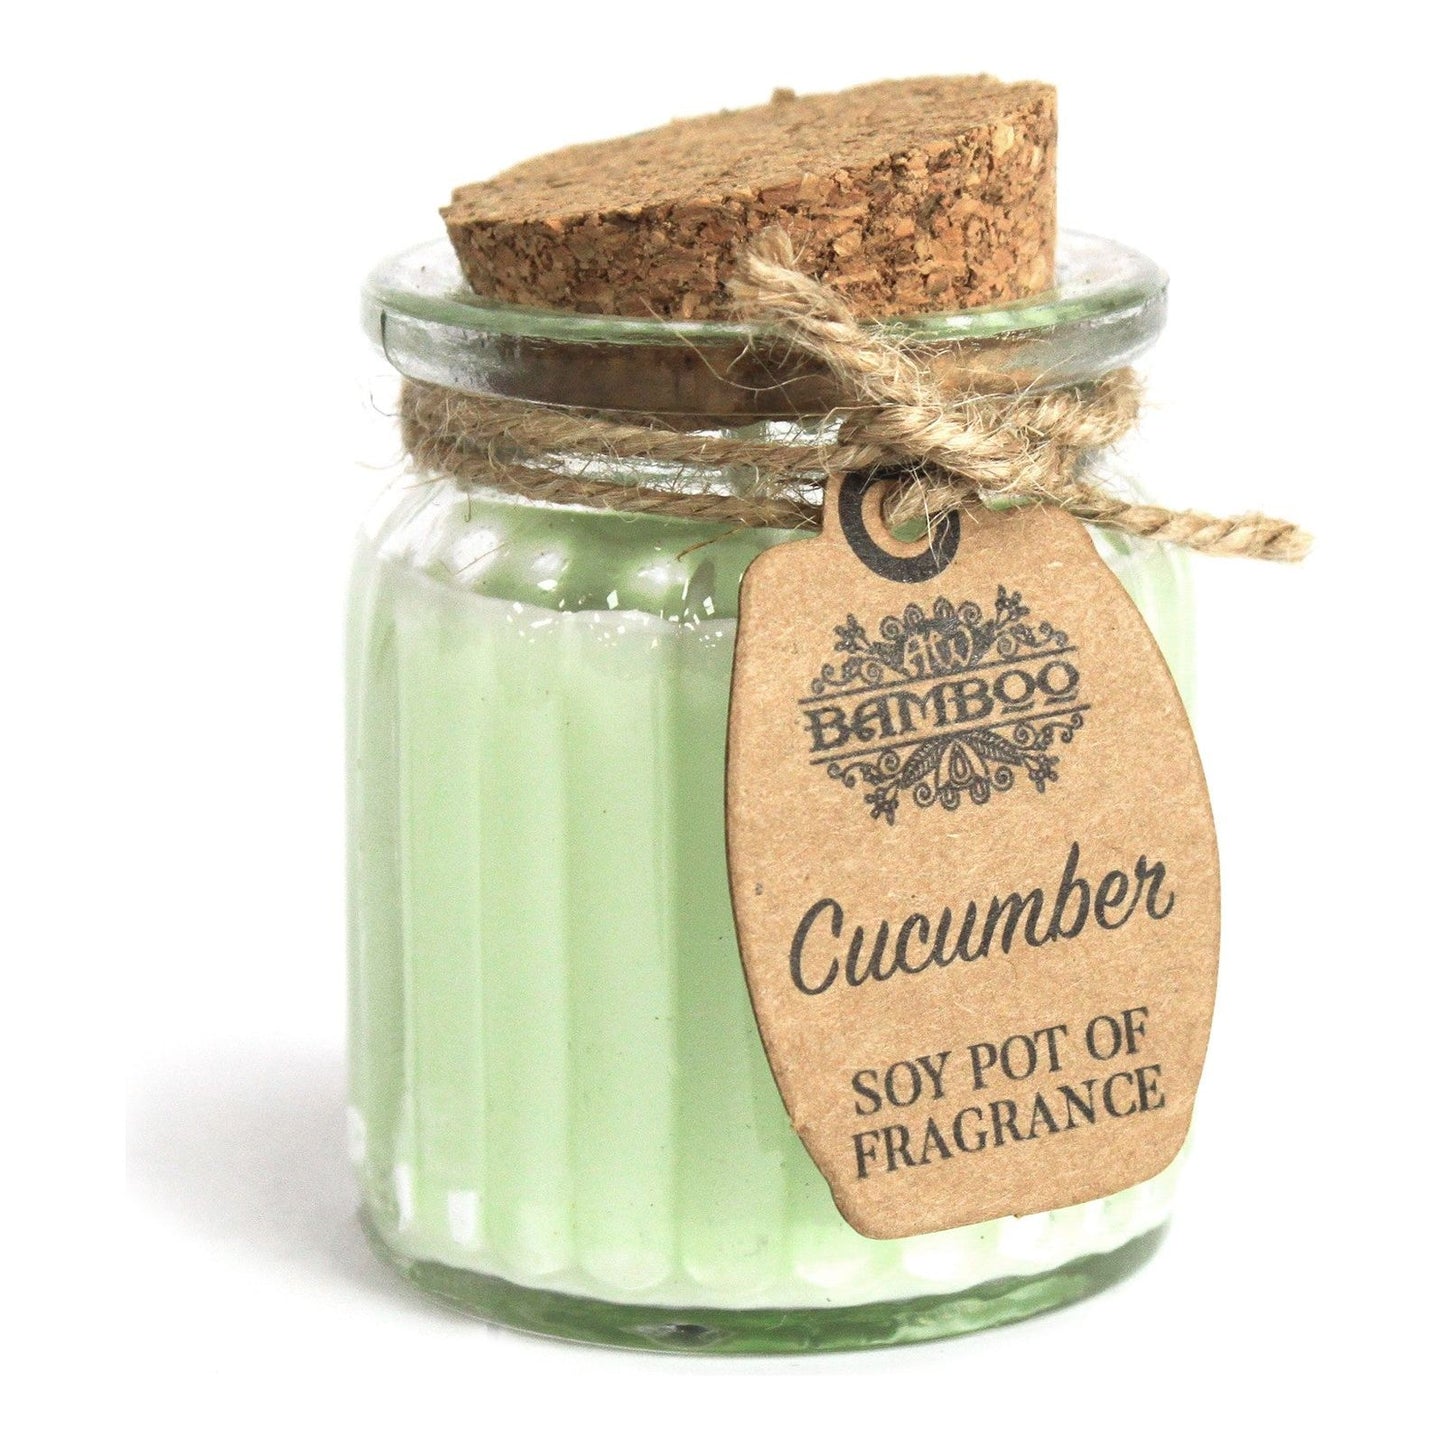 Cucumber Soy Pot of Fragrance Candles x 2 - Ashton and Finch